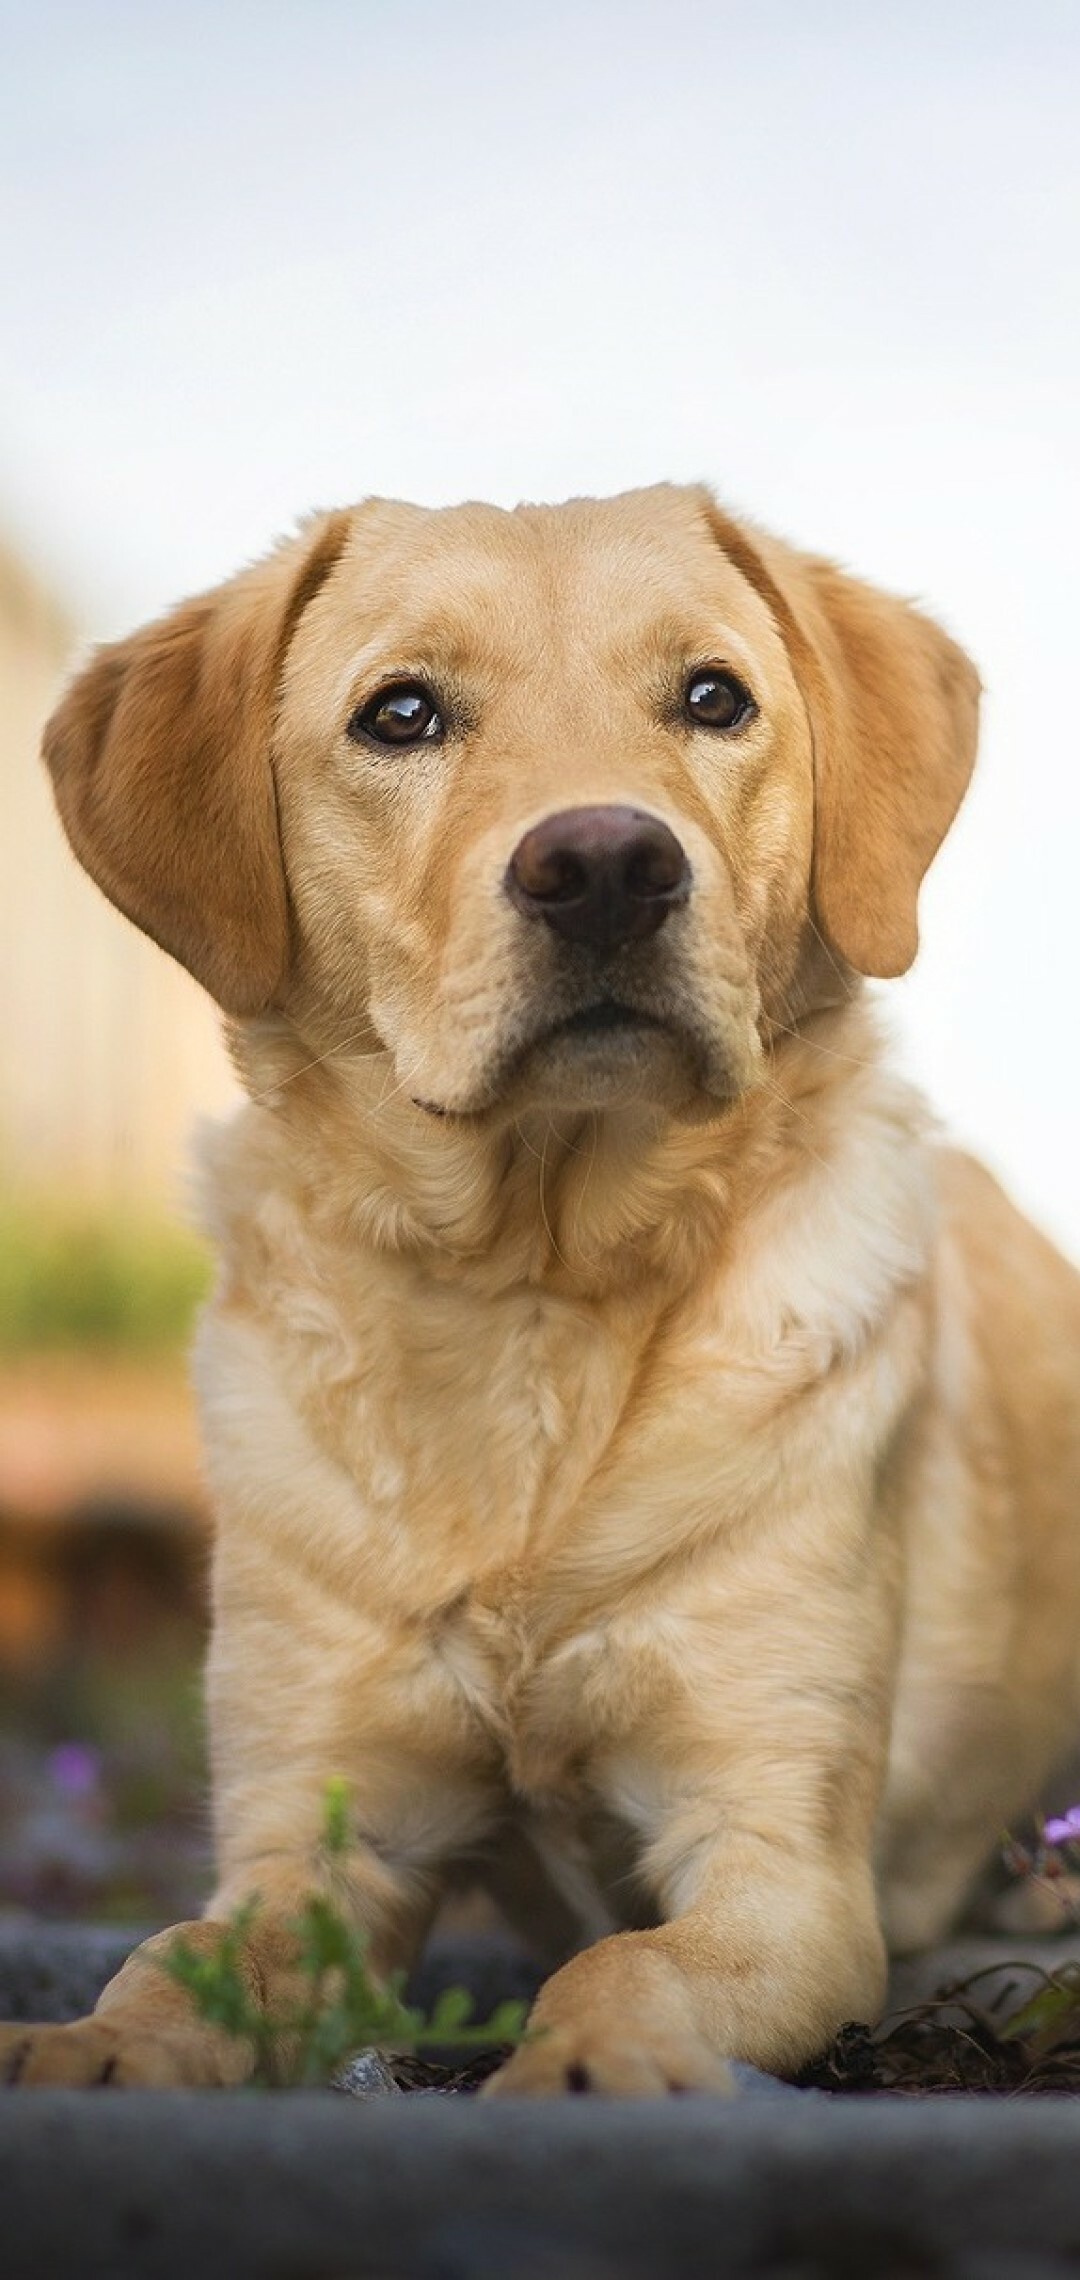 Dog: Common four-legged animal that is often kept by people as a pet. 1080x2280 HD Wallpaper.